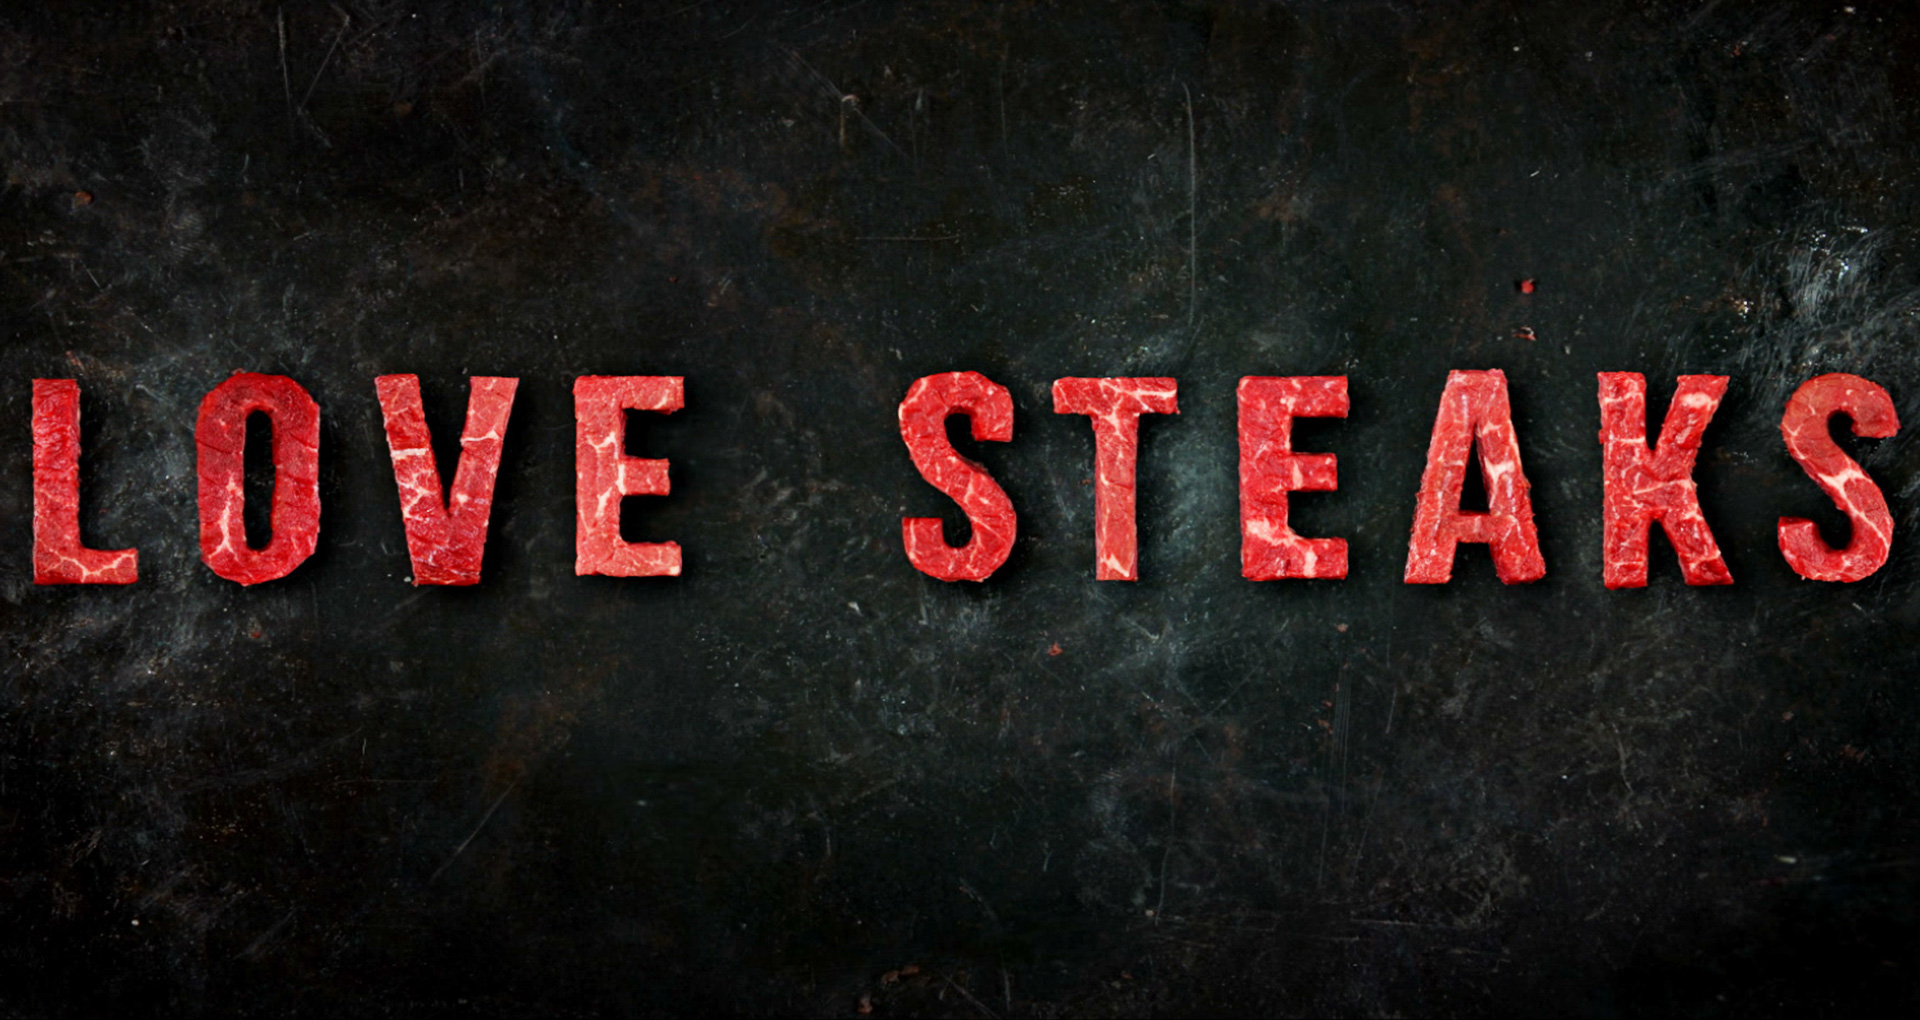 Lovesteaks – letters made out of real steaks